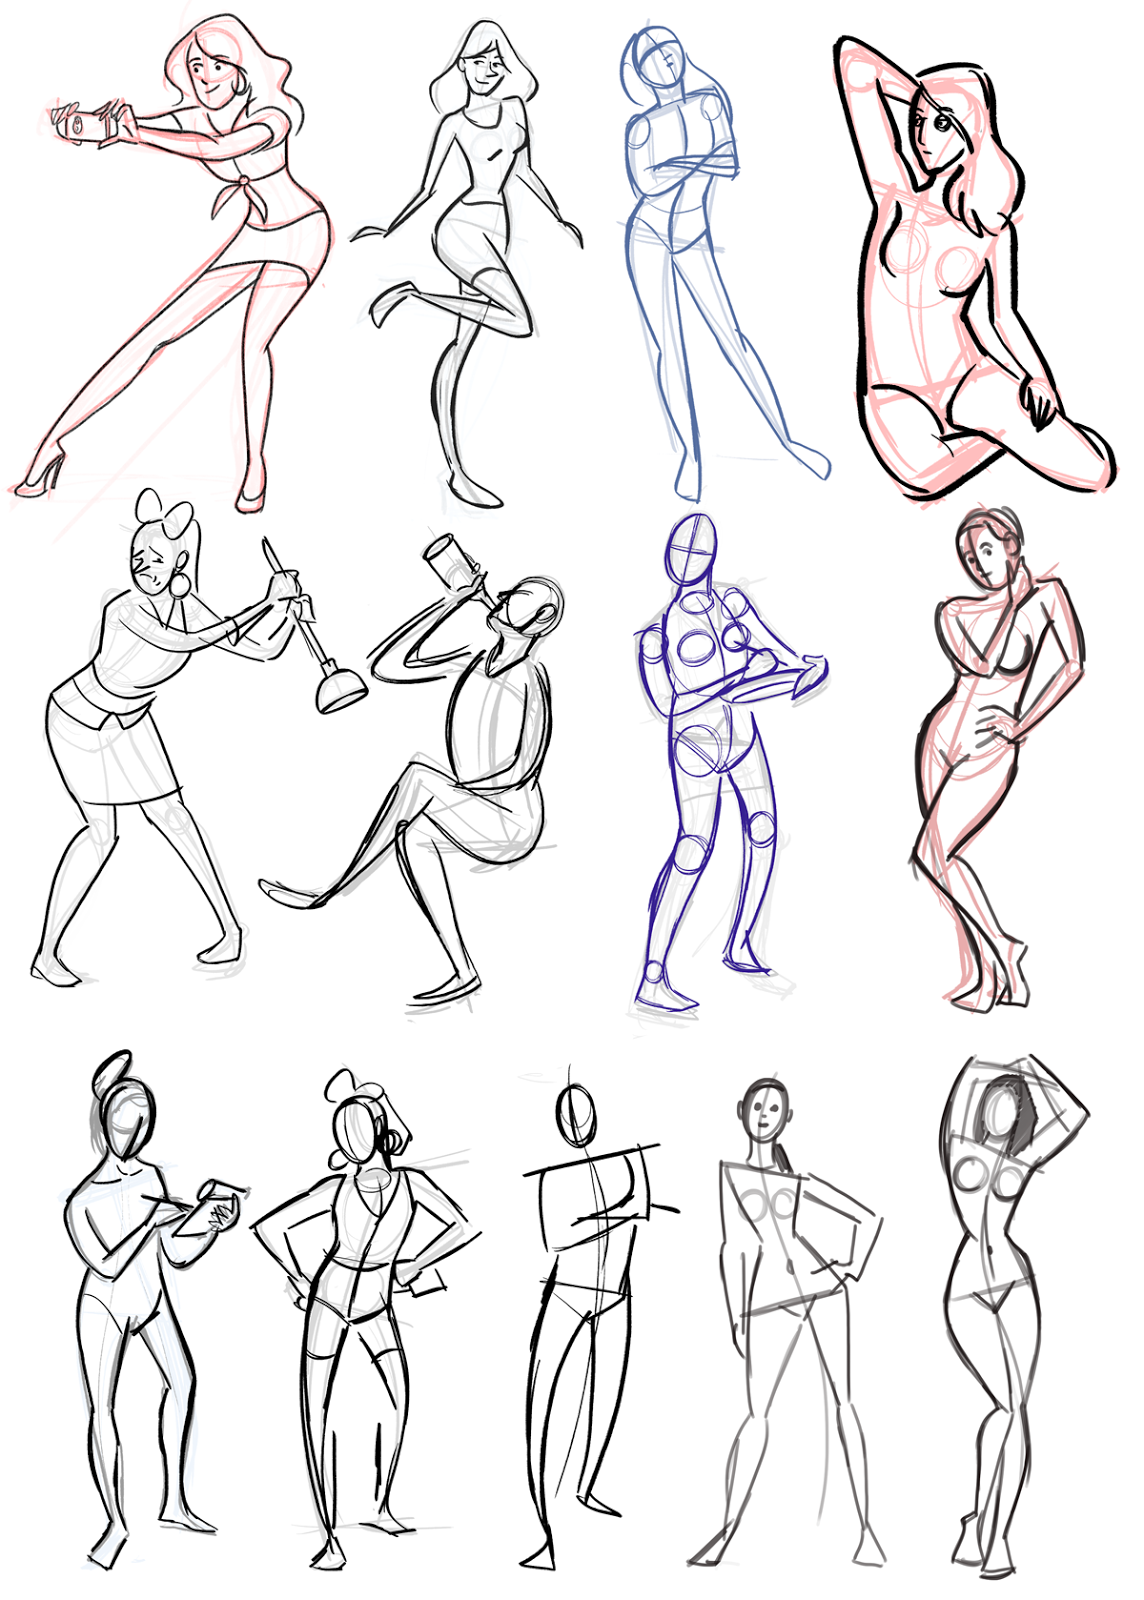 Learning drawing principles: figures